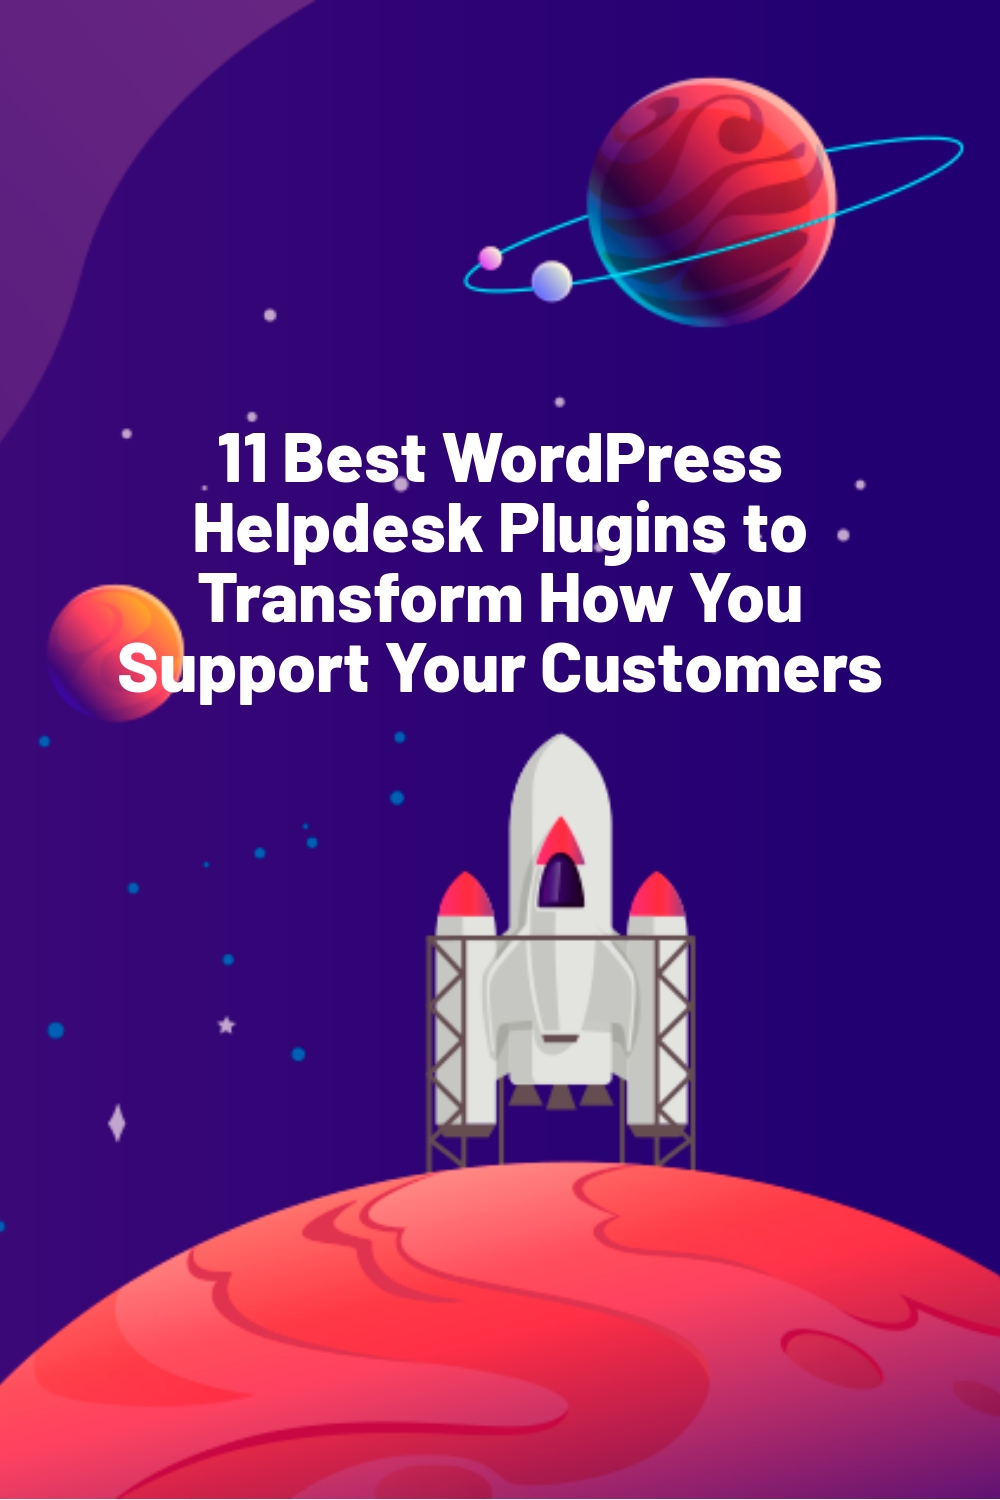 11 Best WordPress Helpdesk Plugins to Transform How You Support Your Customers